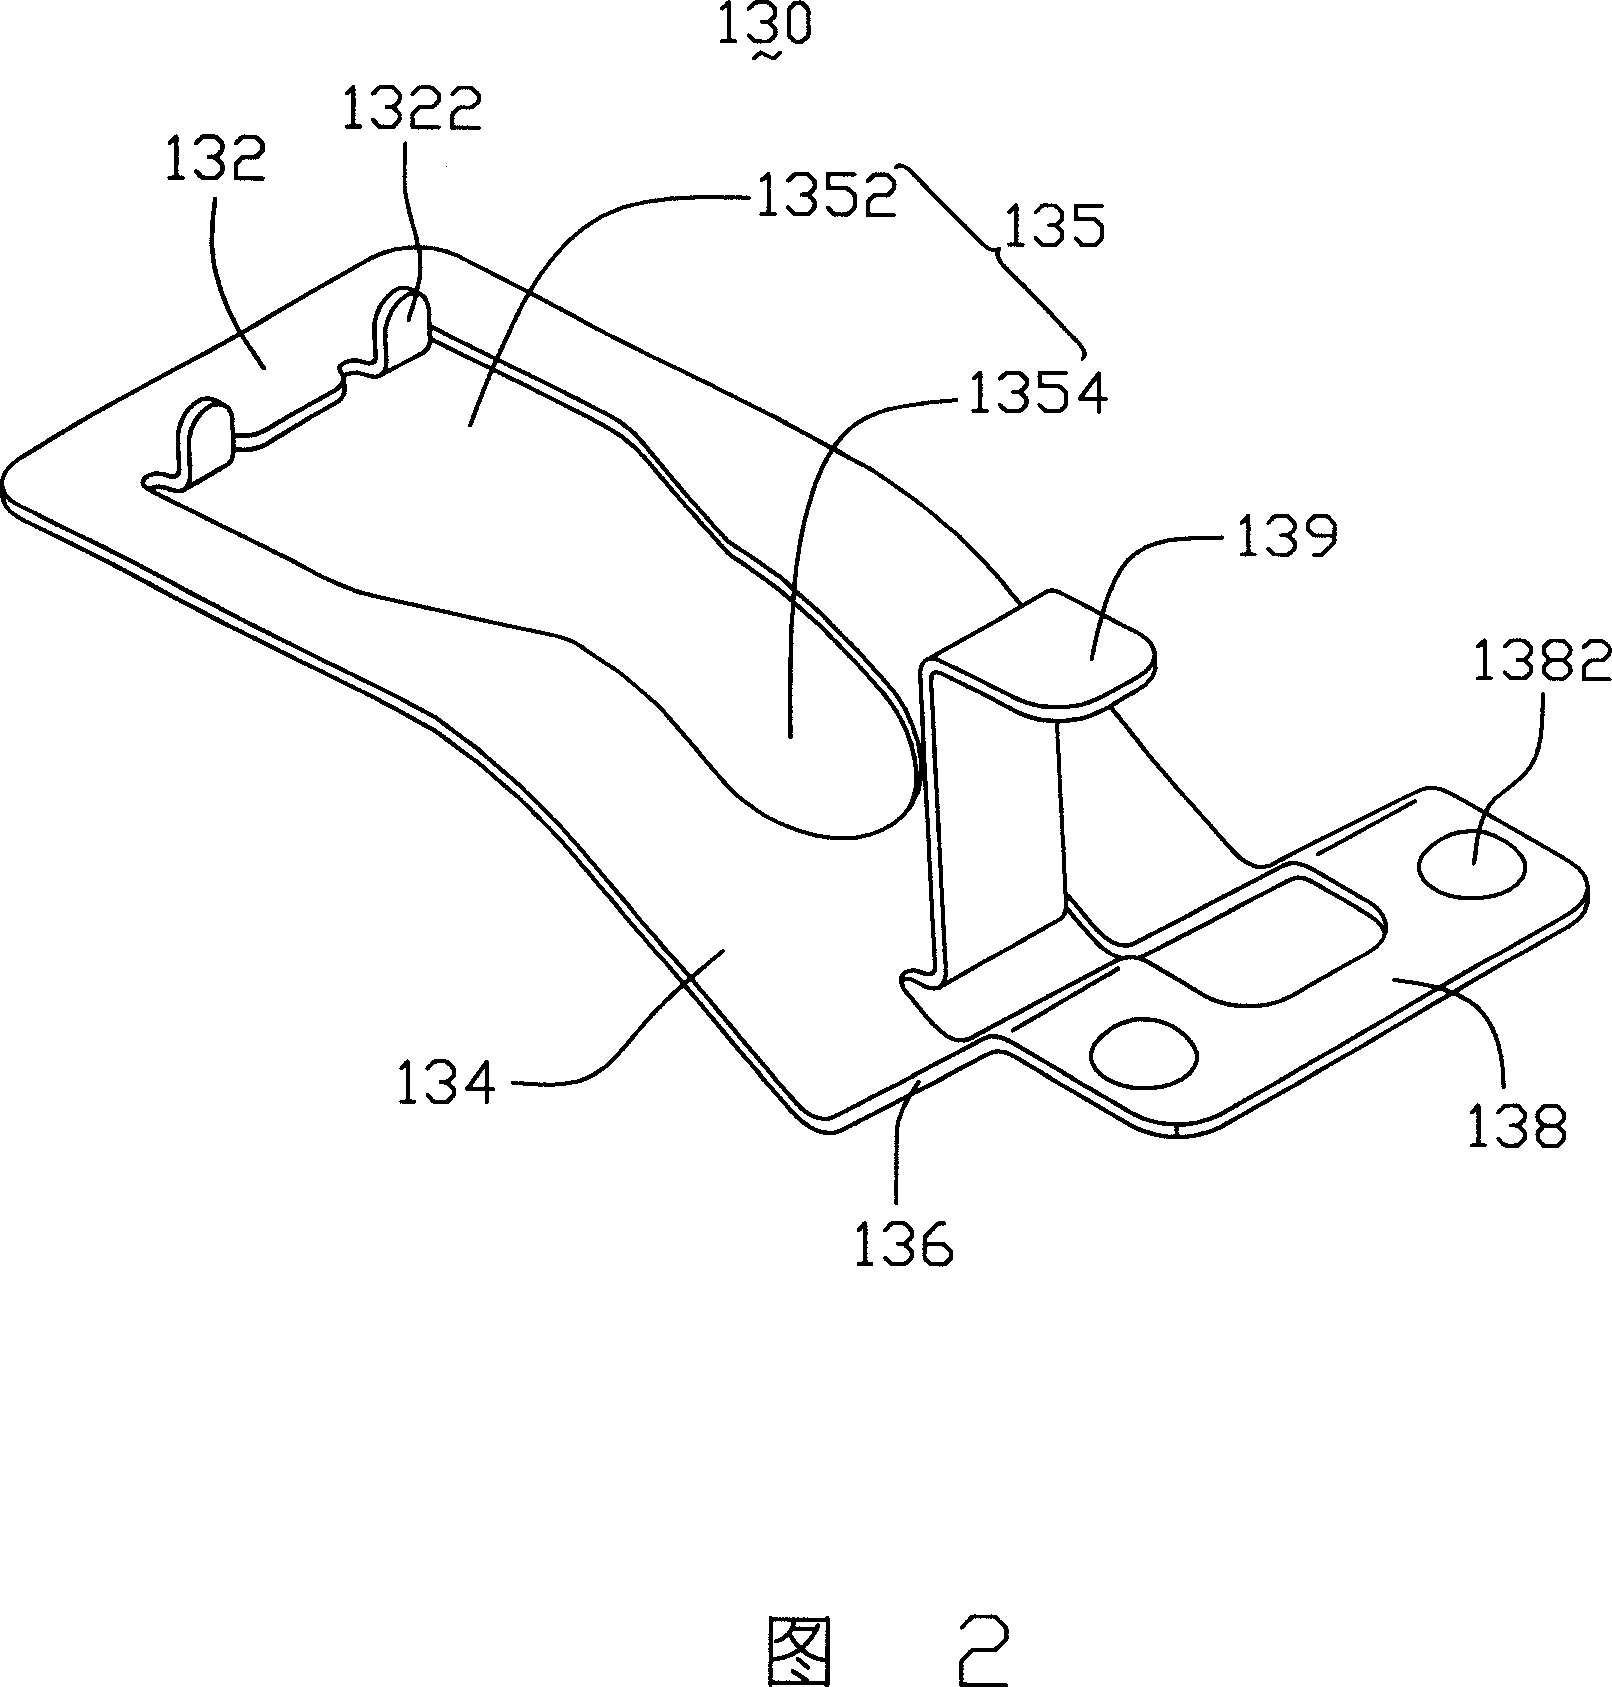 Electronic device with grounding structure